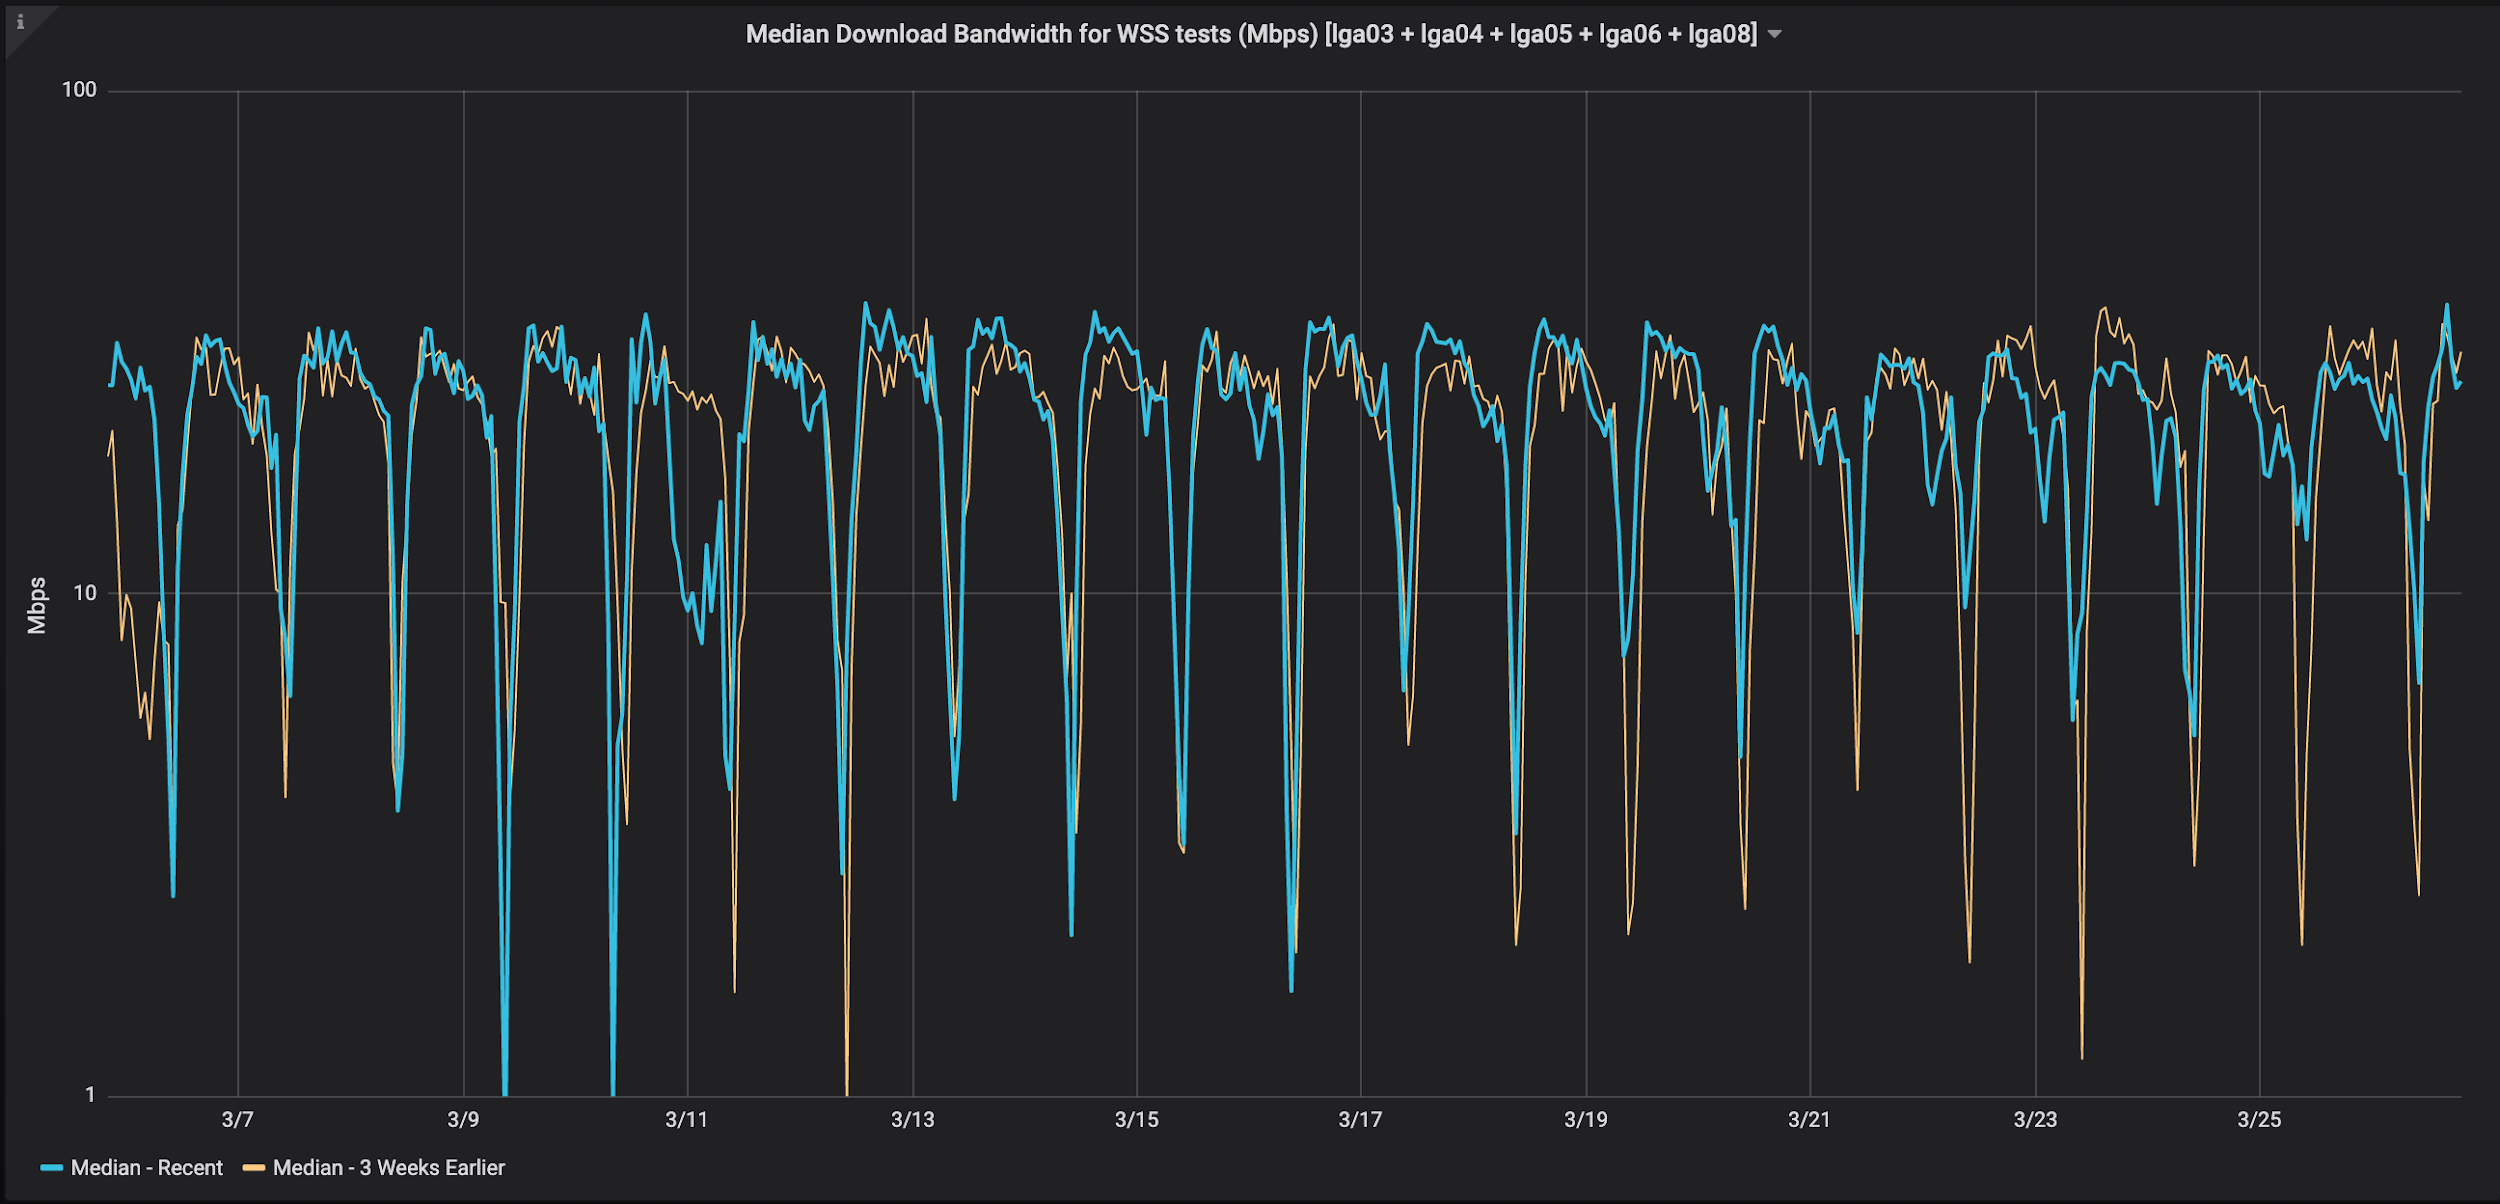 Median Download Bandwidth for WSS tests, New York, USA (Mbps)